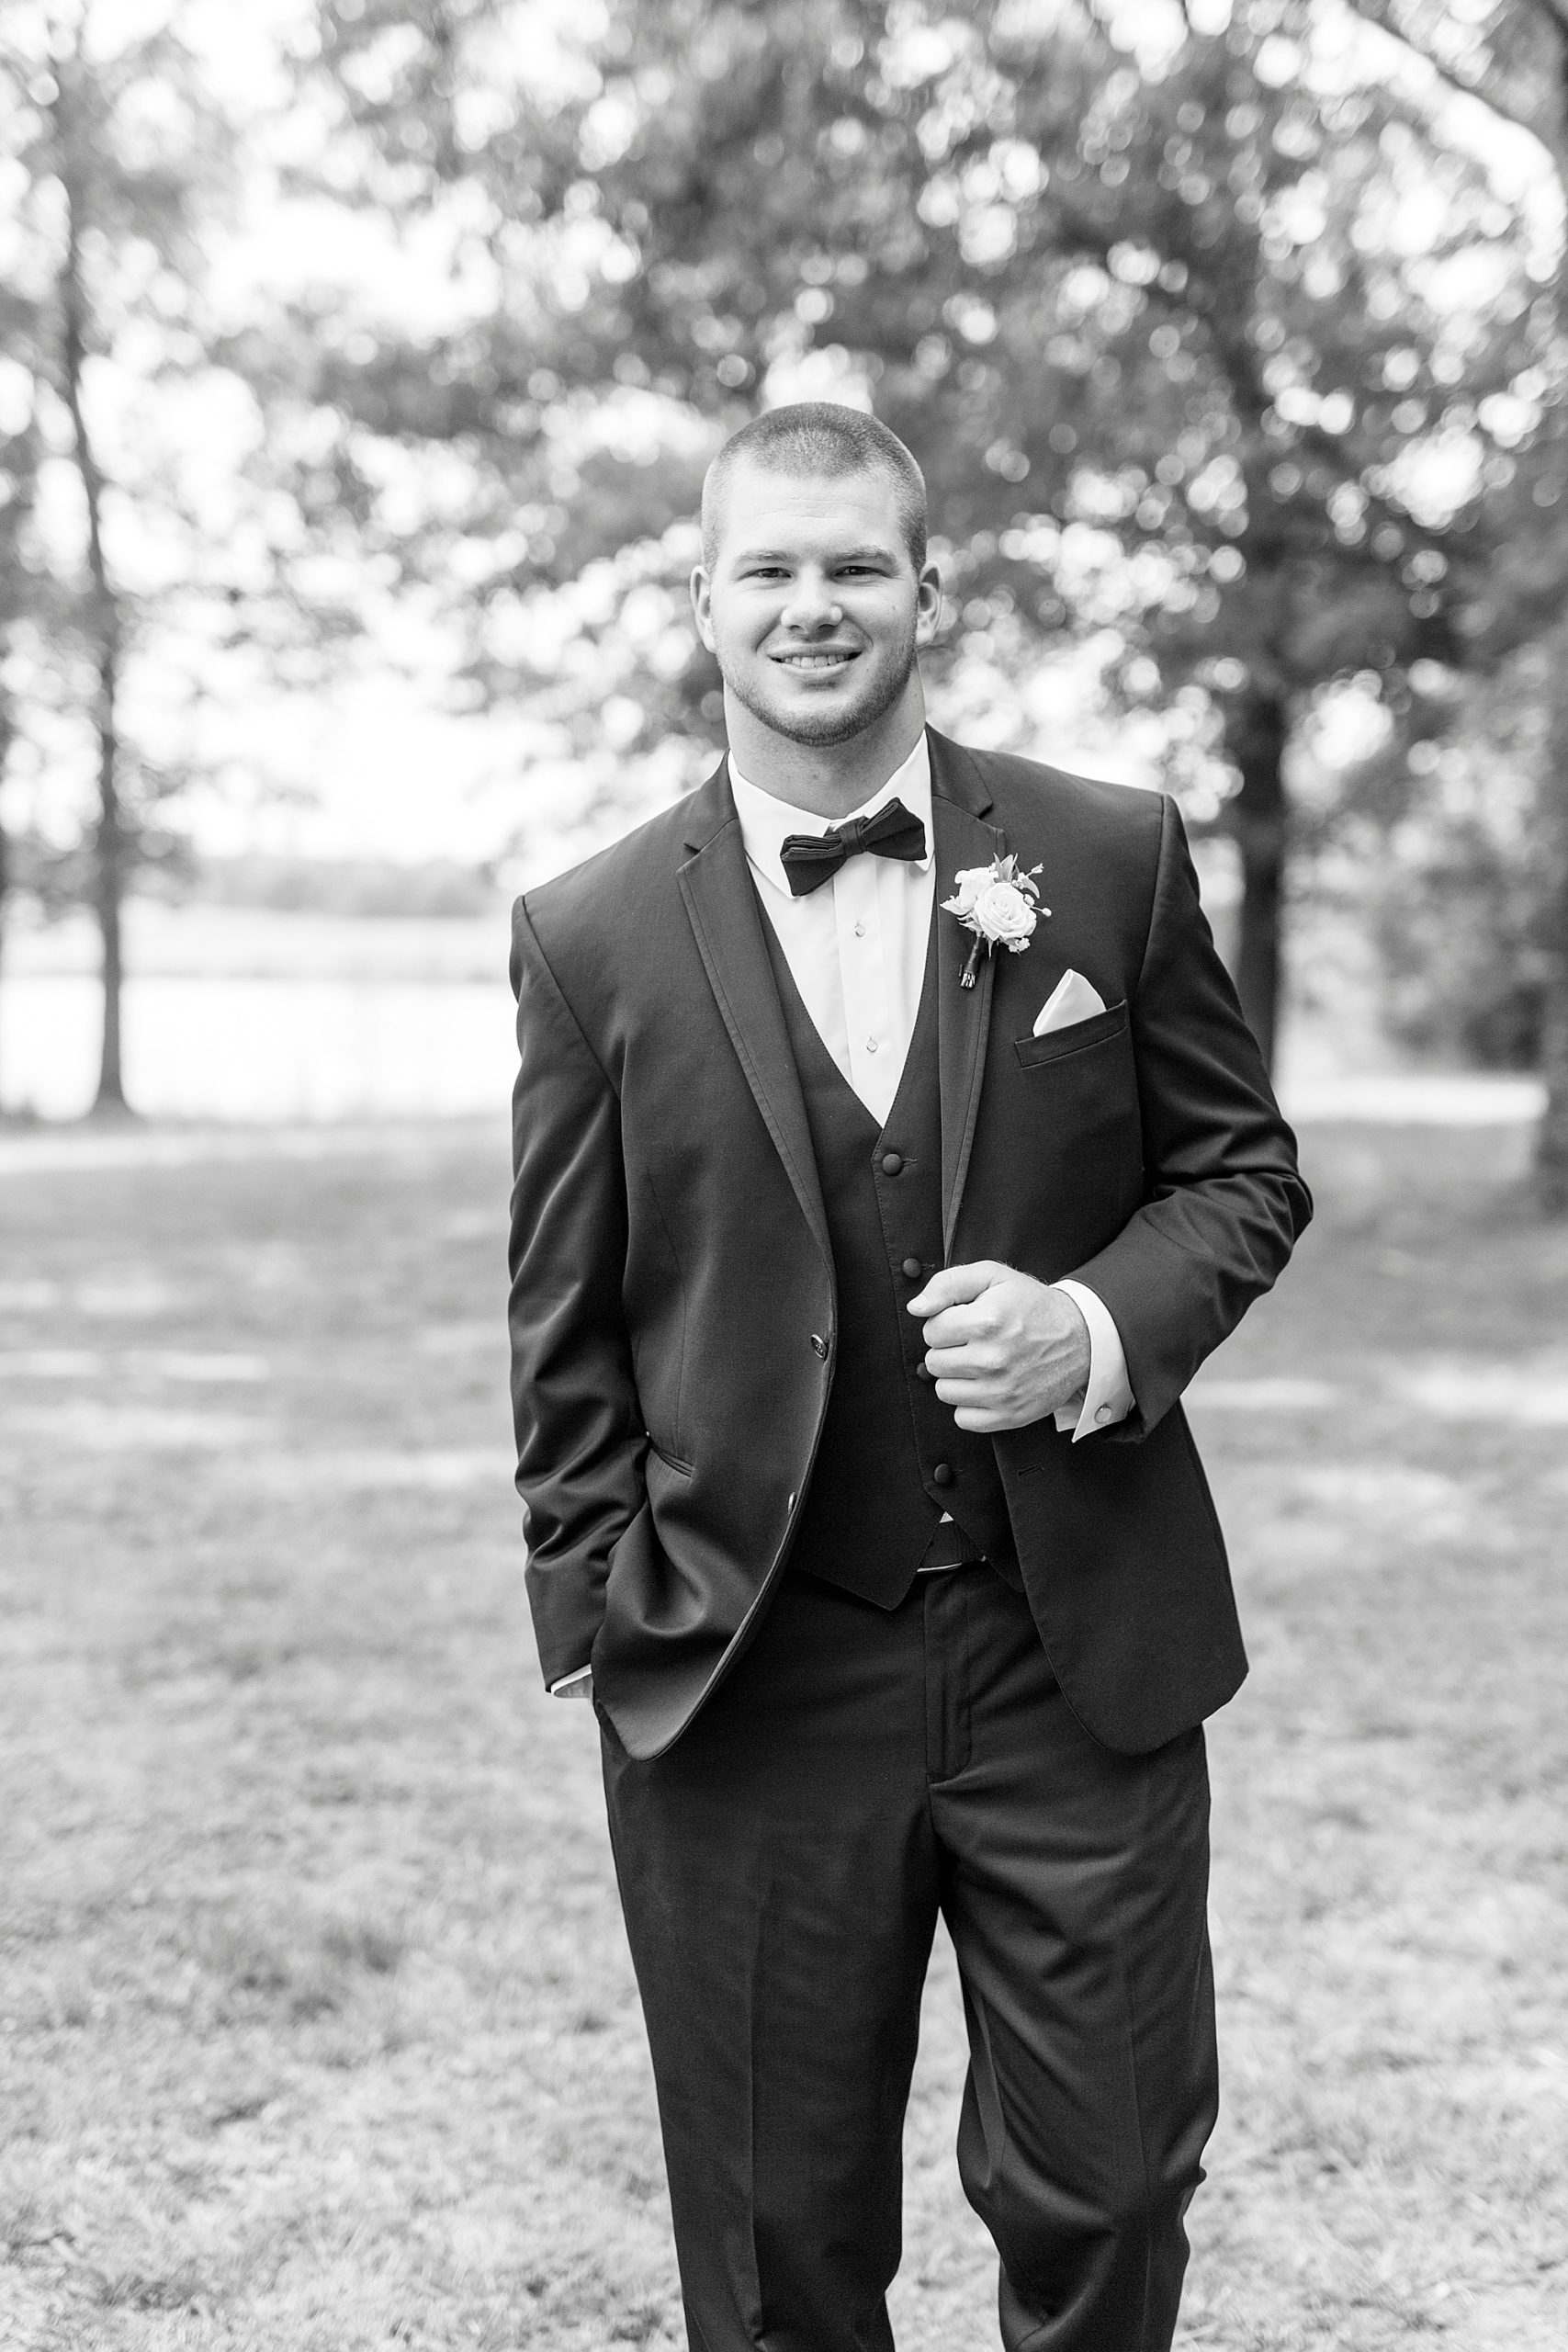 groom poses holding lapel on suit